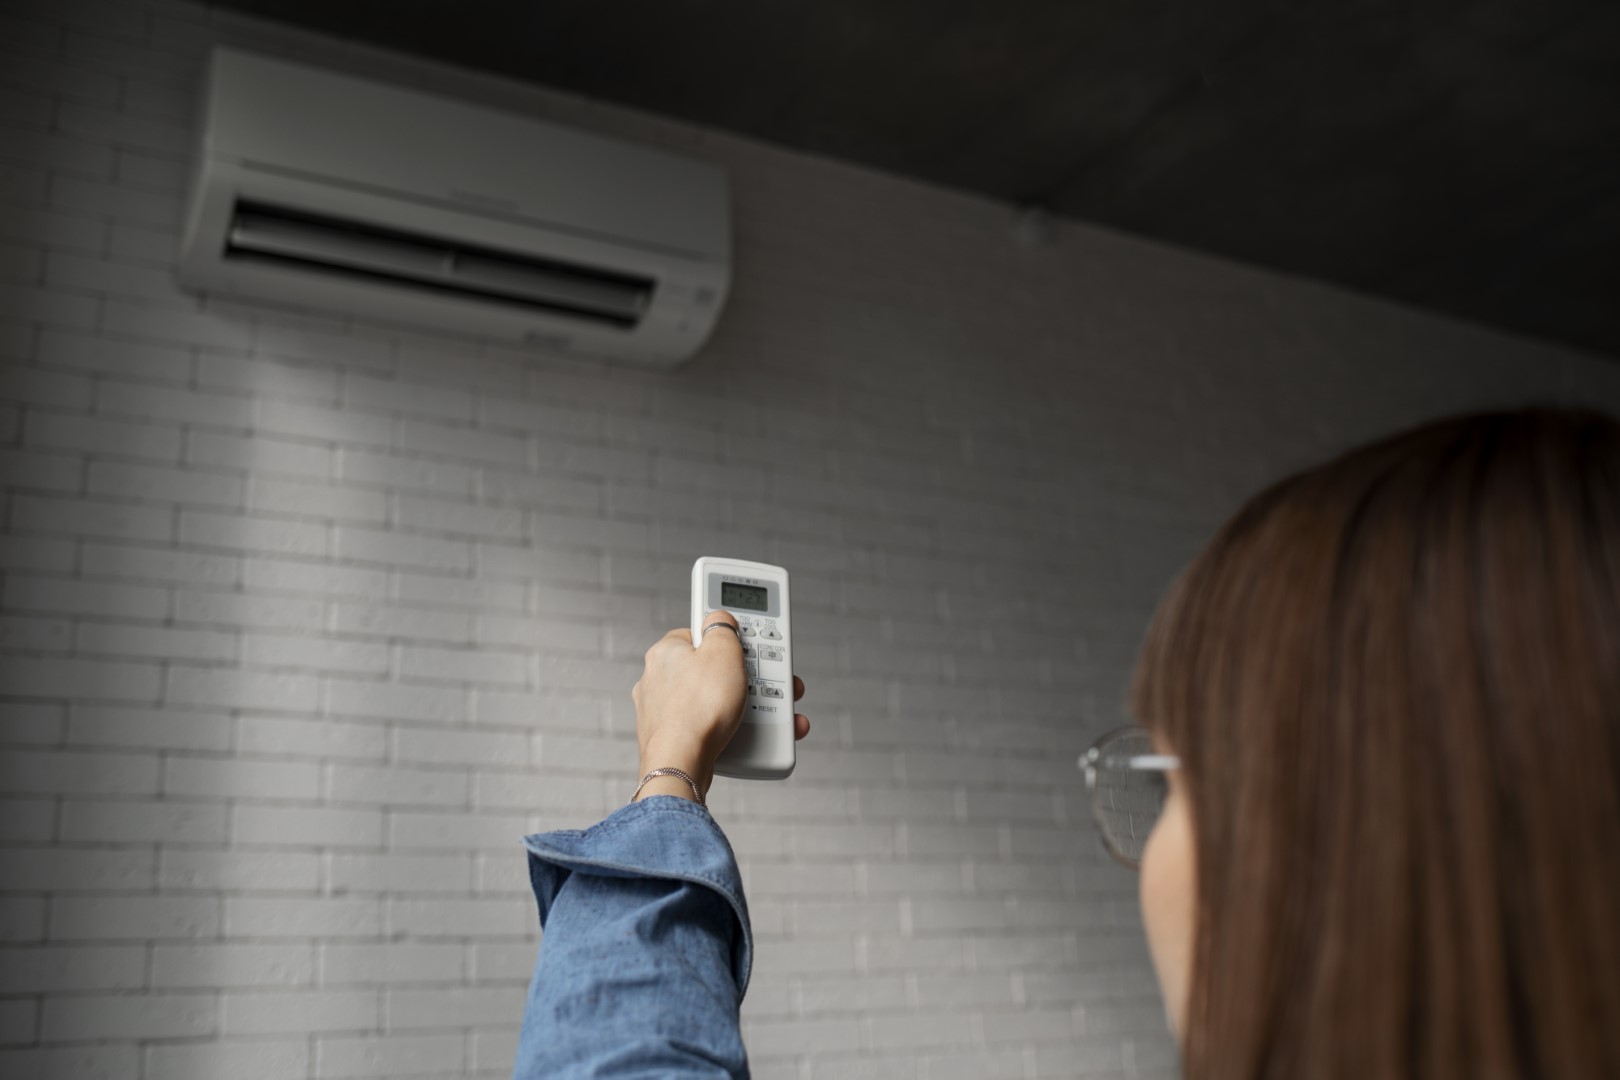 How to Fix Air Conditioner Not Cooling